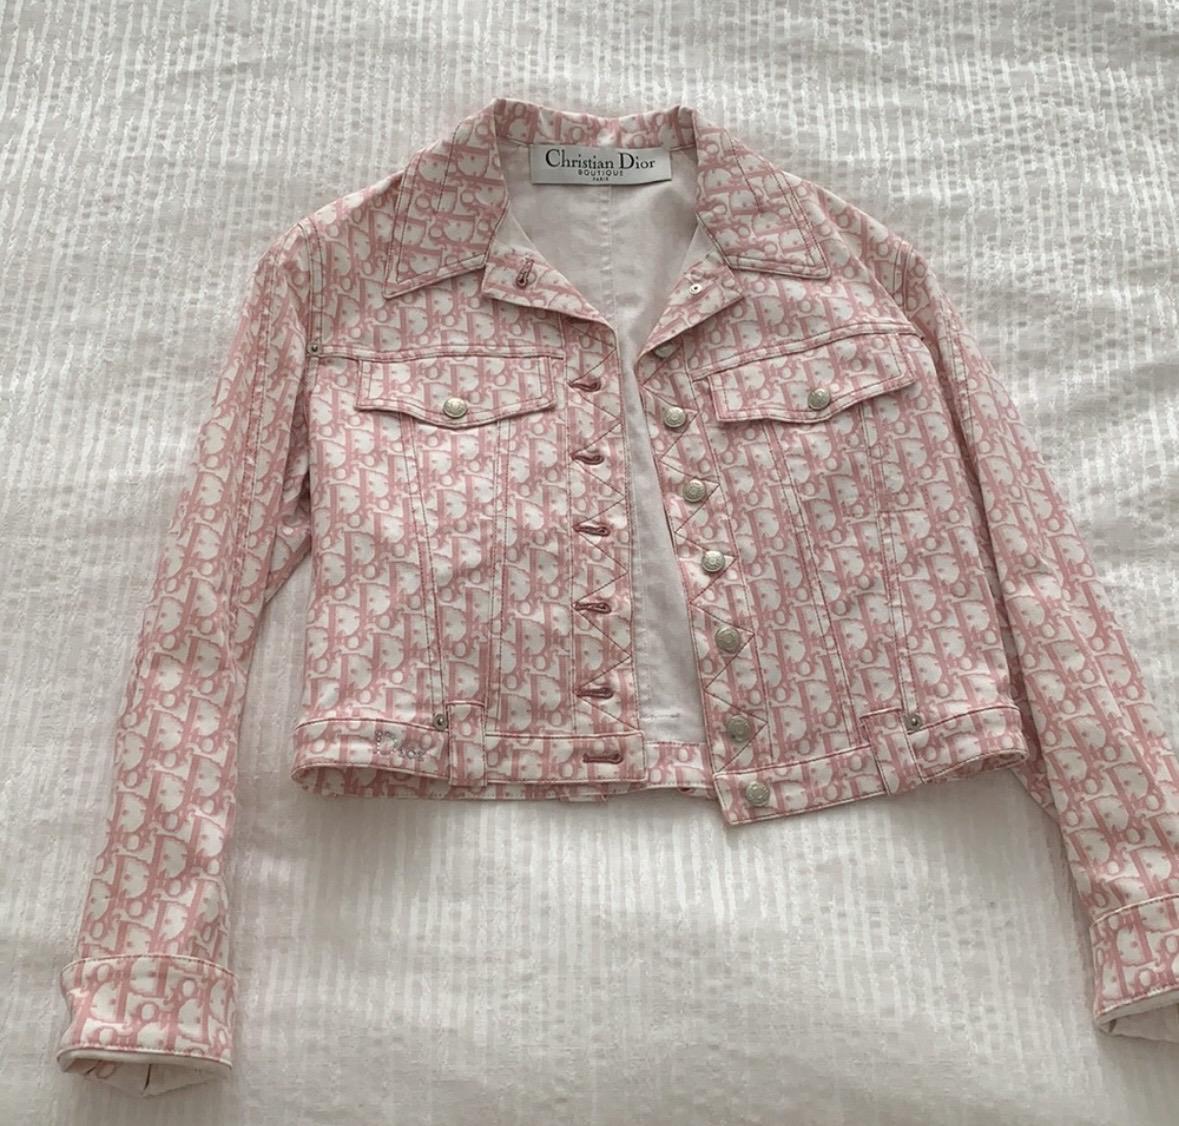 Christian Dior by John Galliano 2004 Girly monogram jacket  For Sale 3